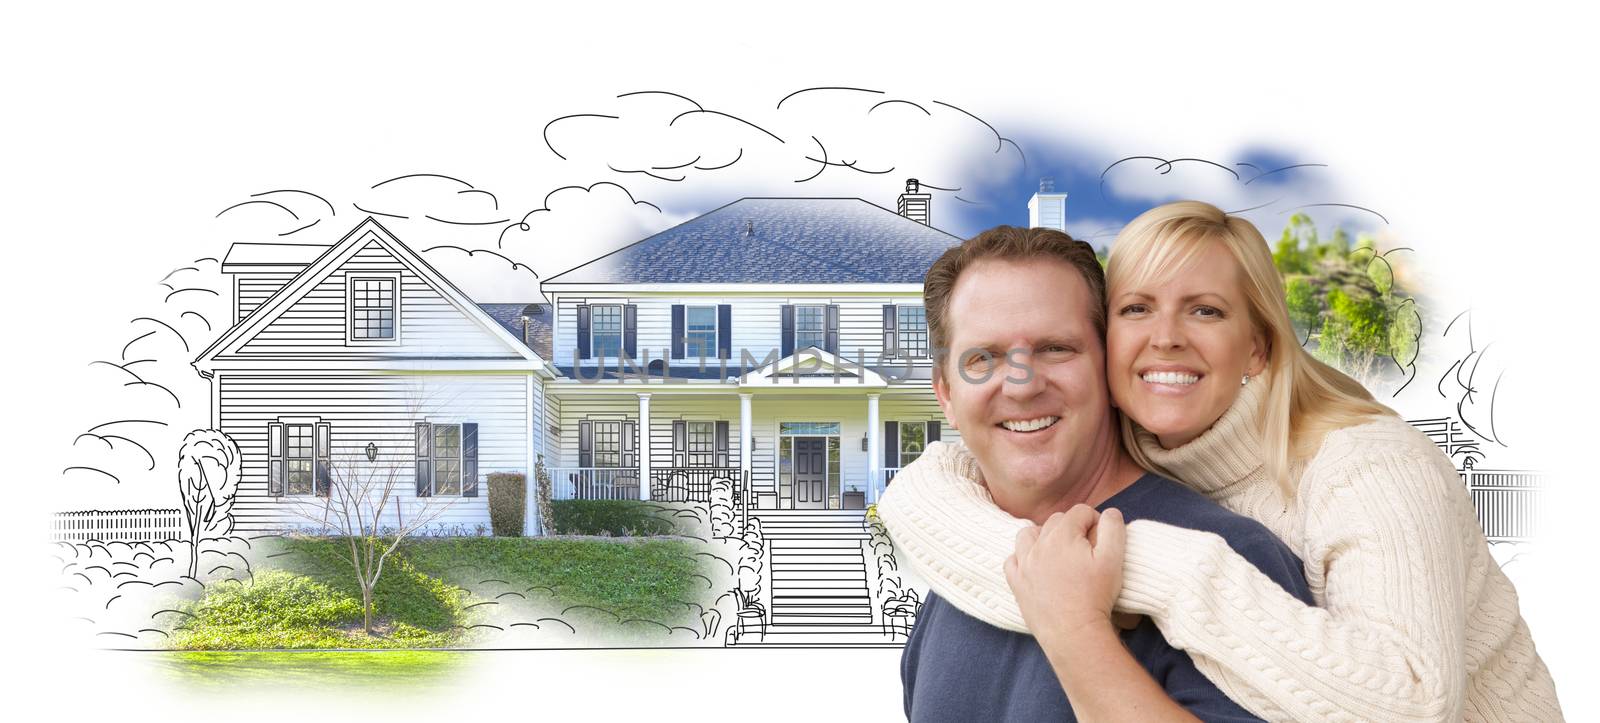 Happy Hugging Couple Over House Drawing and Photo Combination on White.